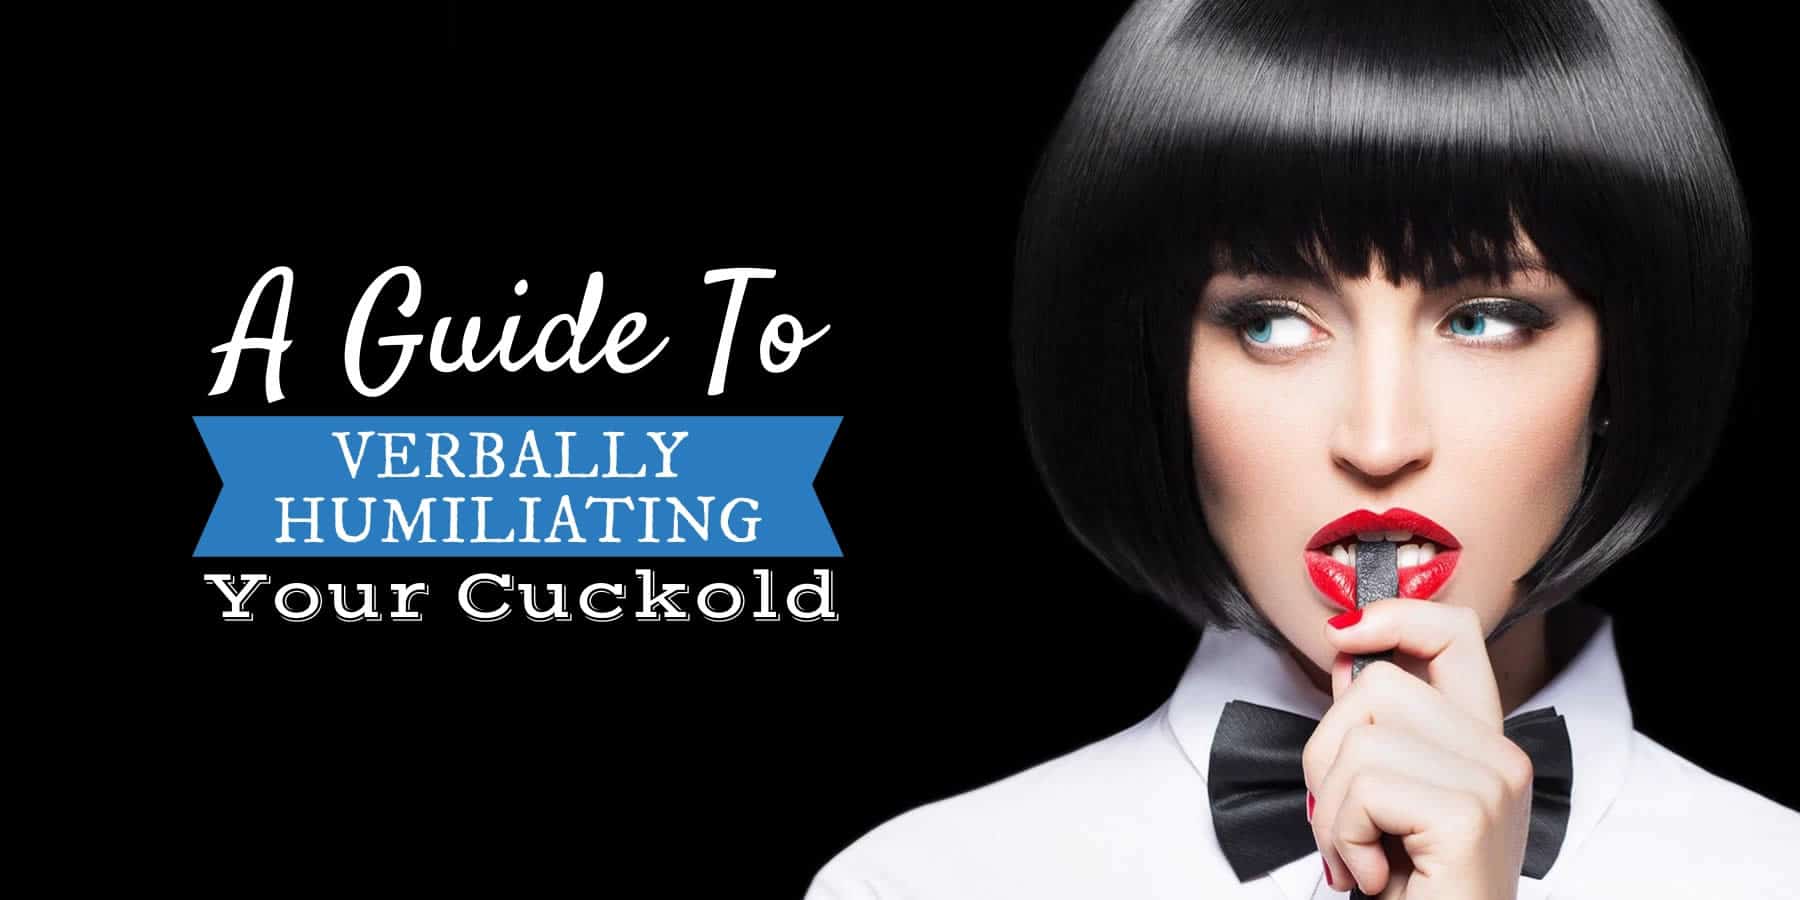 A Guide to Verbally Humiliating Your Cuckold (with Examples) pic